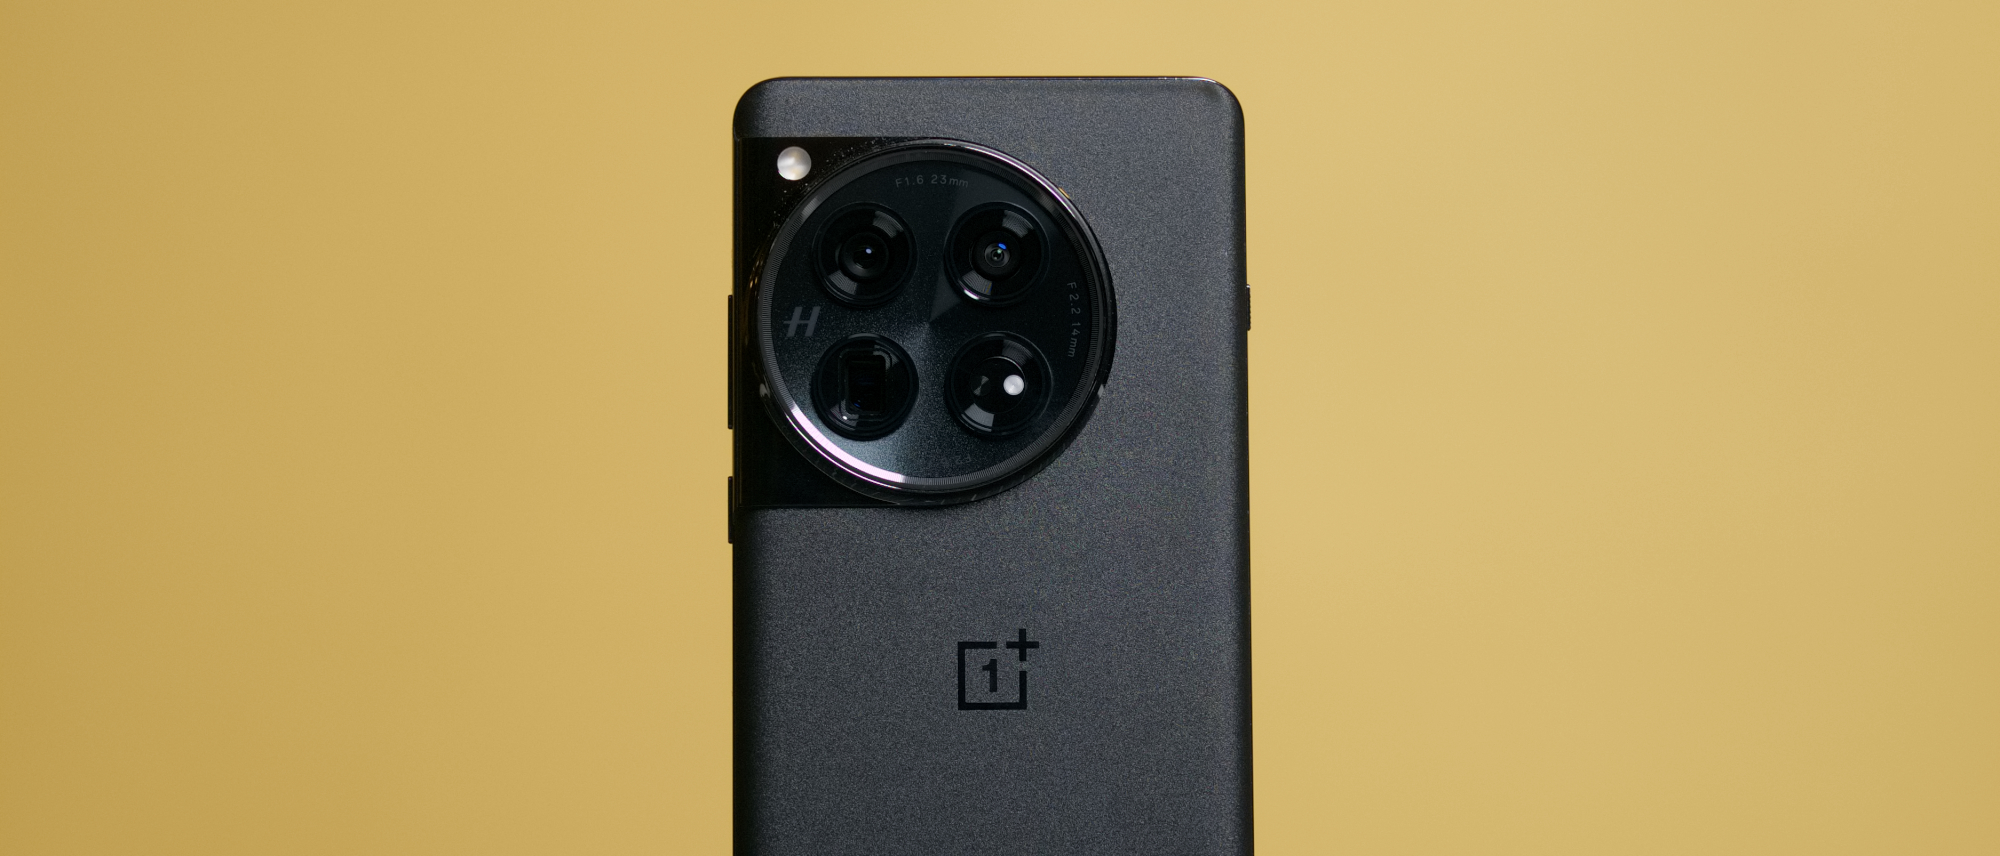 The Ultimate OnePlus 12 Review: Is It Worth the Hype? - Pros and cons summary